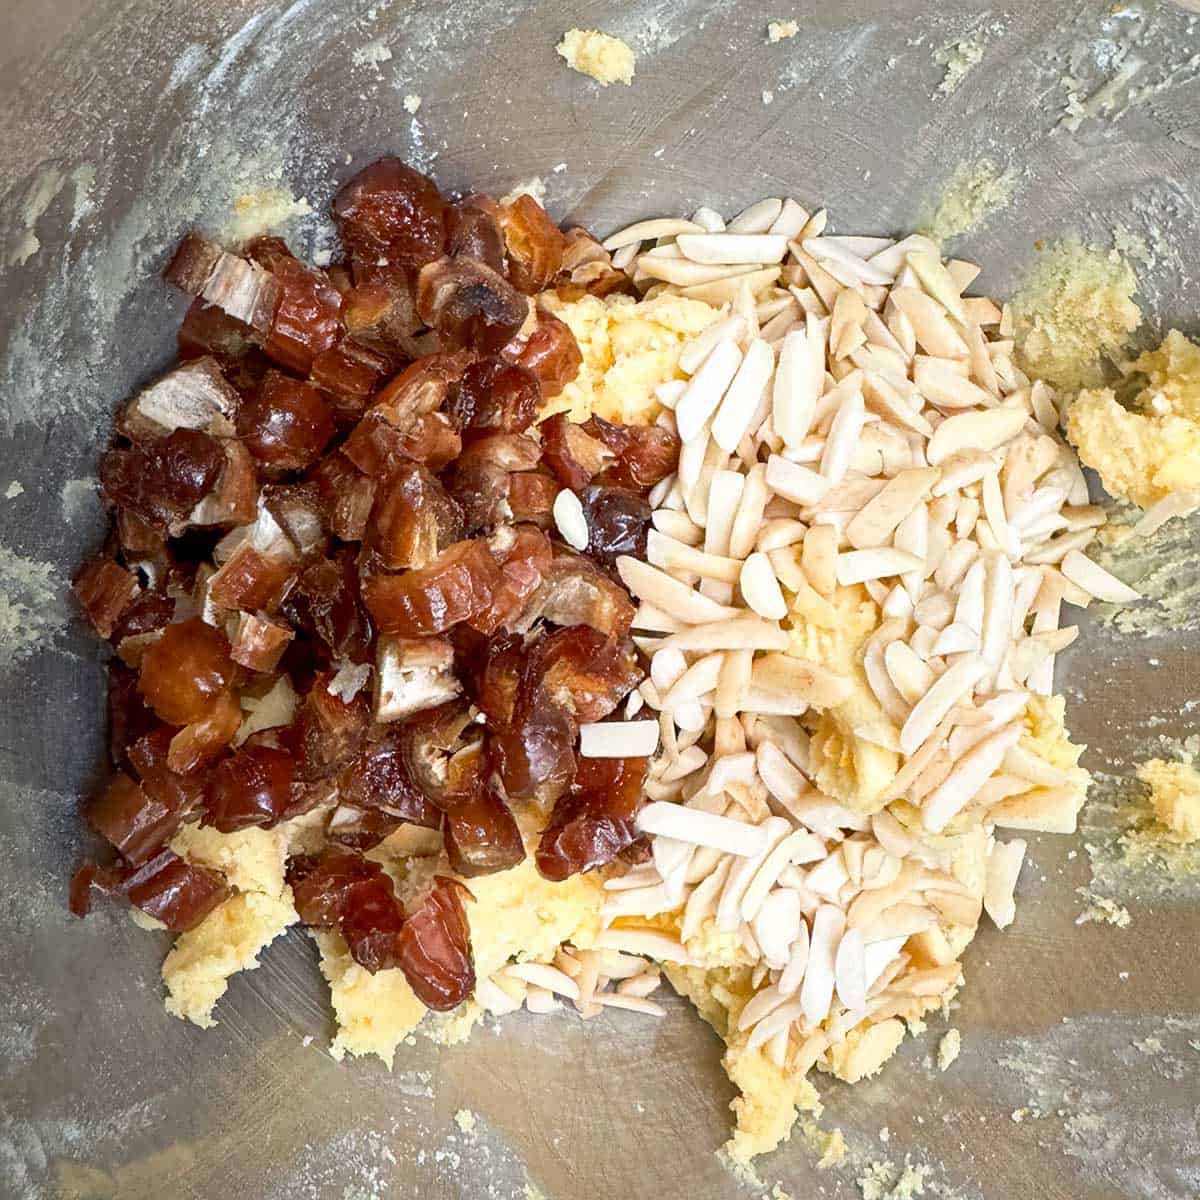 Flour mixture has been added than almonds pieces and chopped dates.